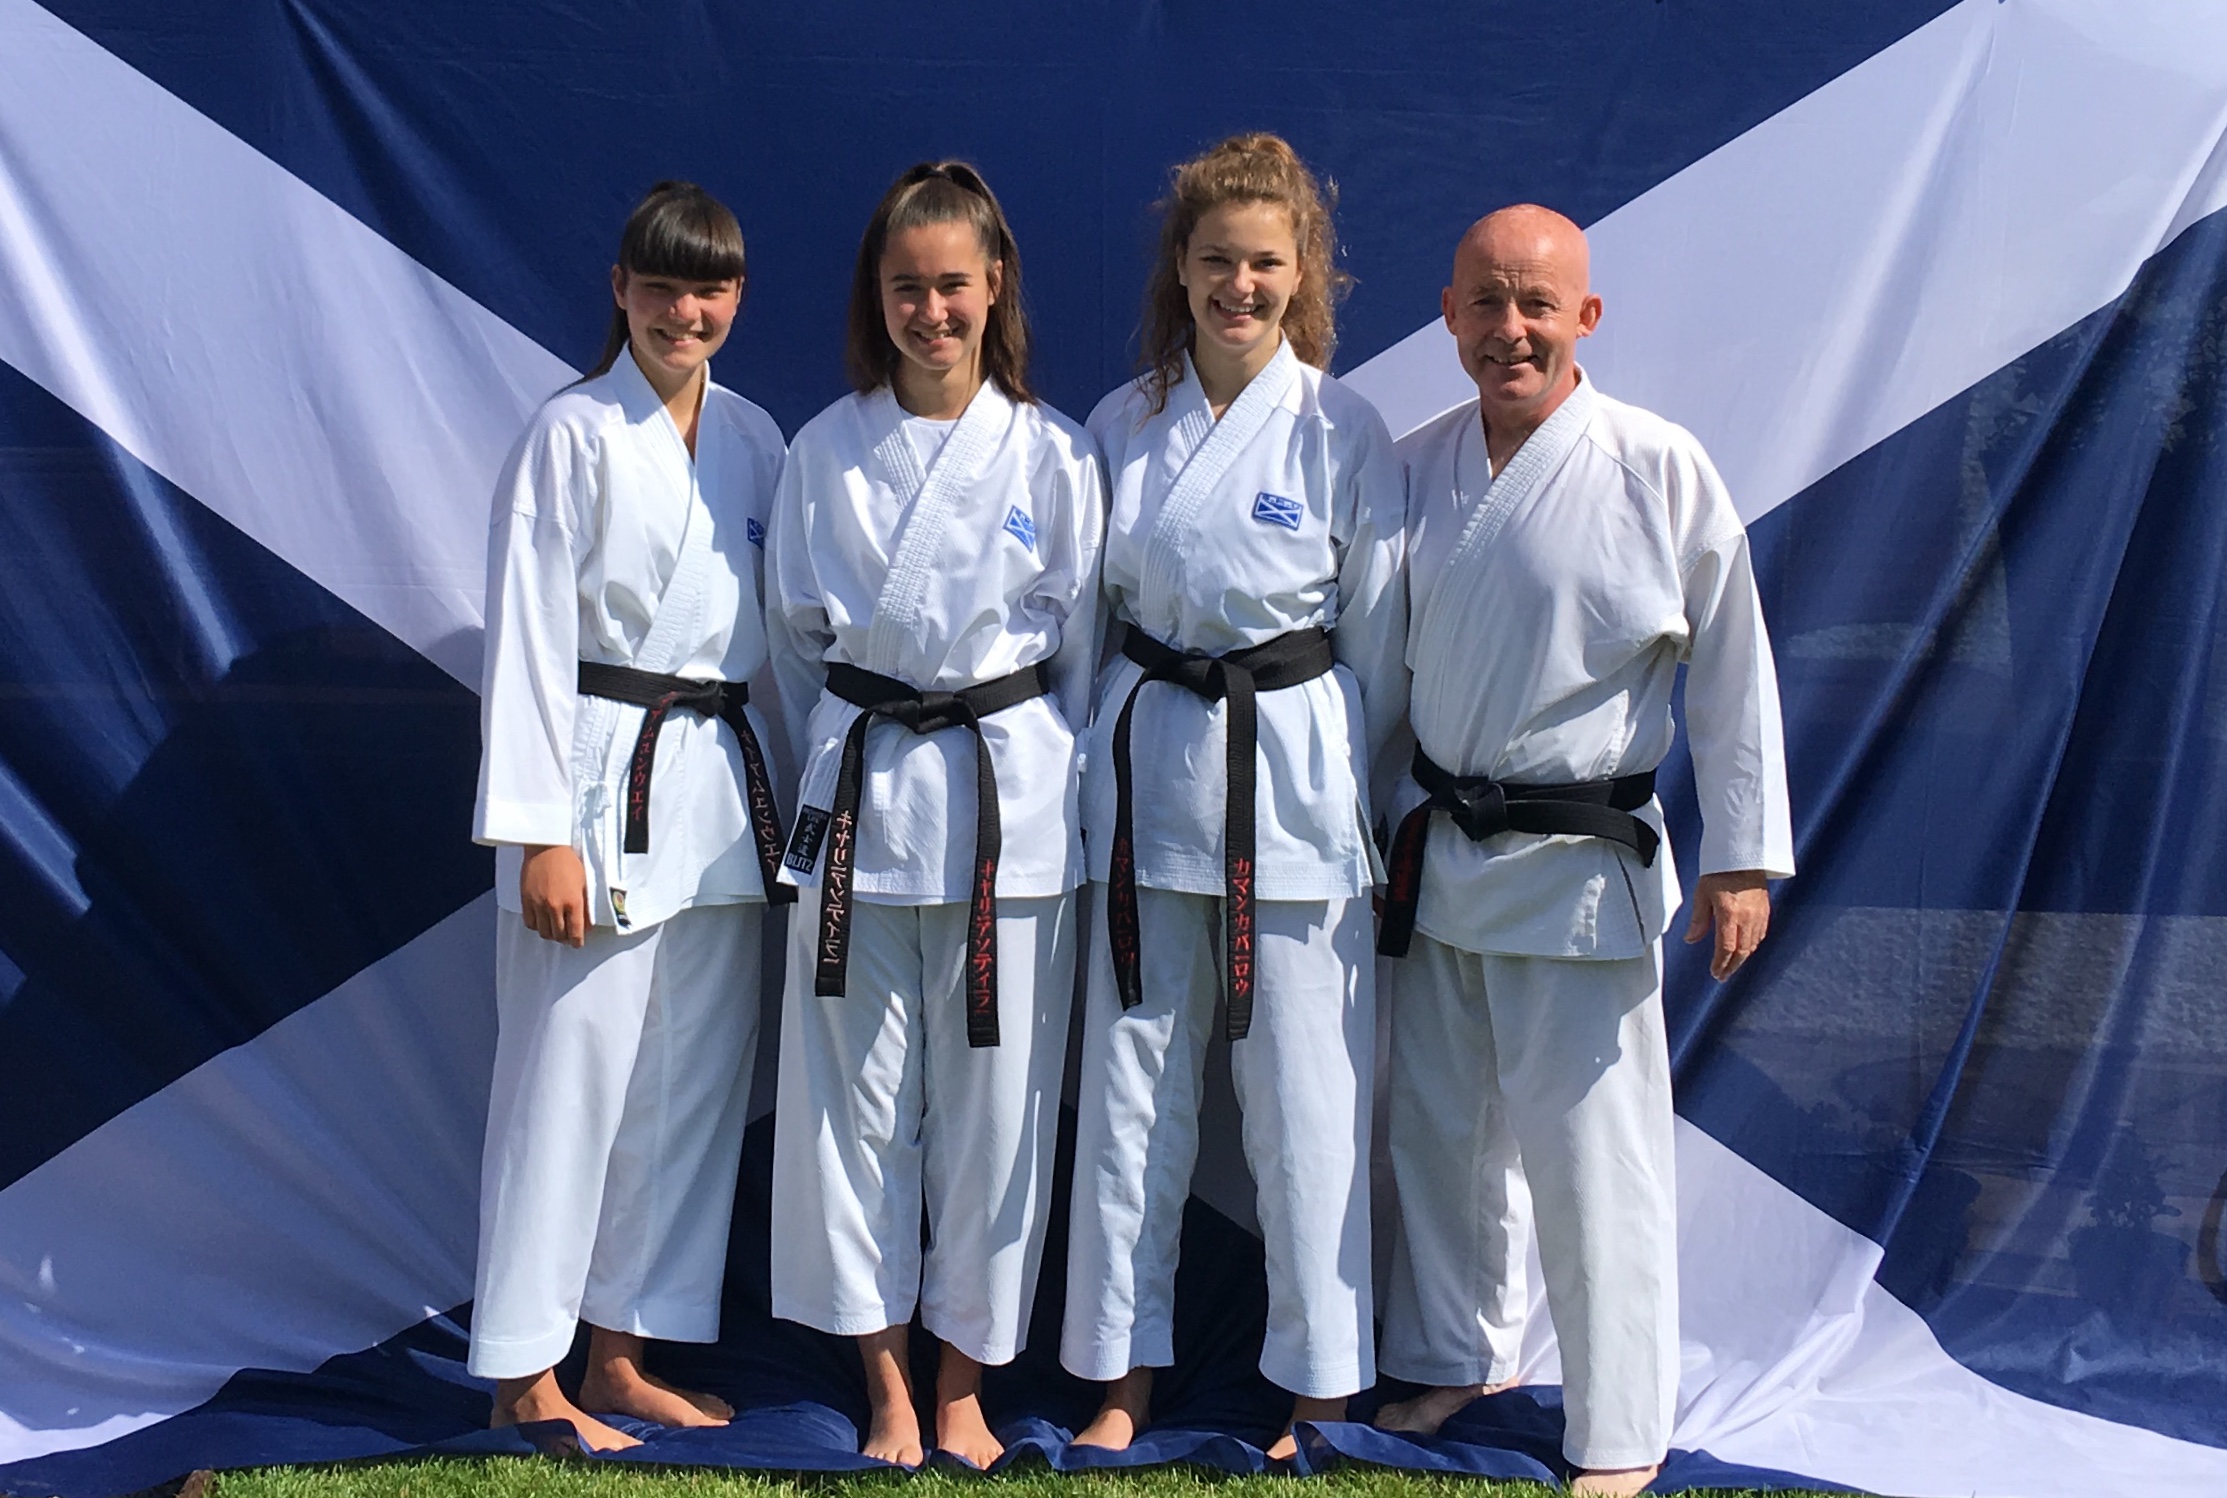 Niamh Conway, Carrie-Anne Taylor, Samantha Barlow with instructor Kevin Scott